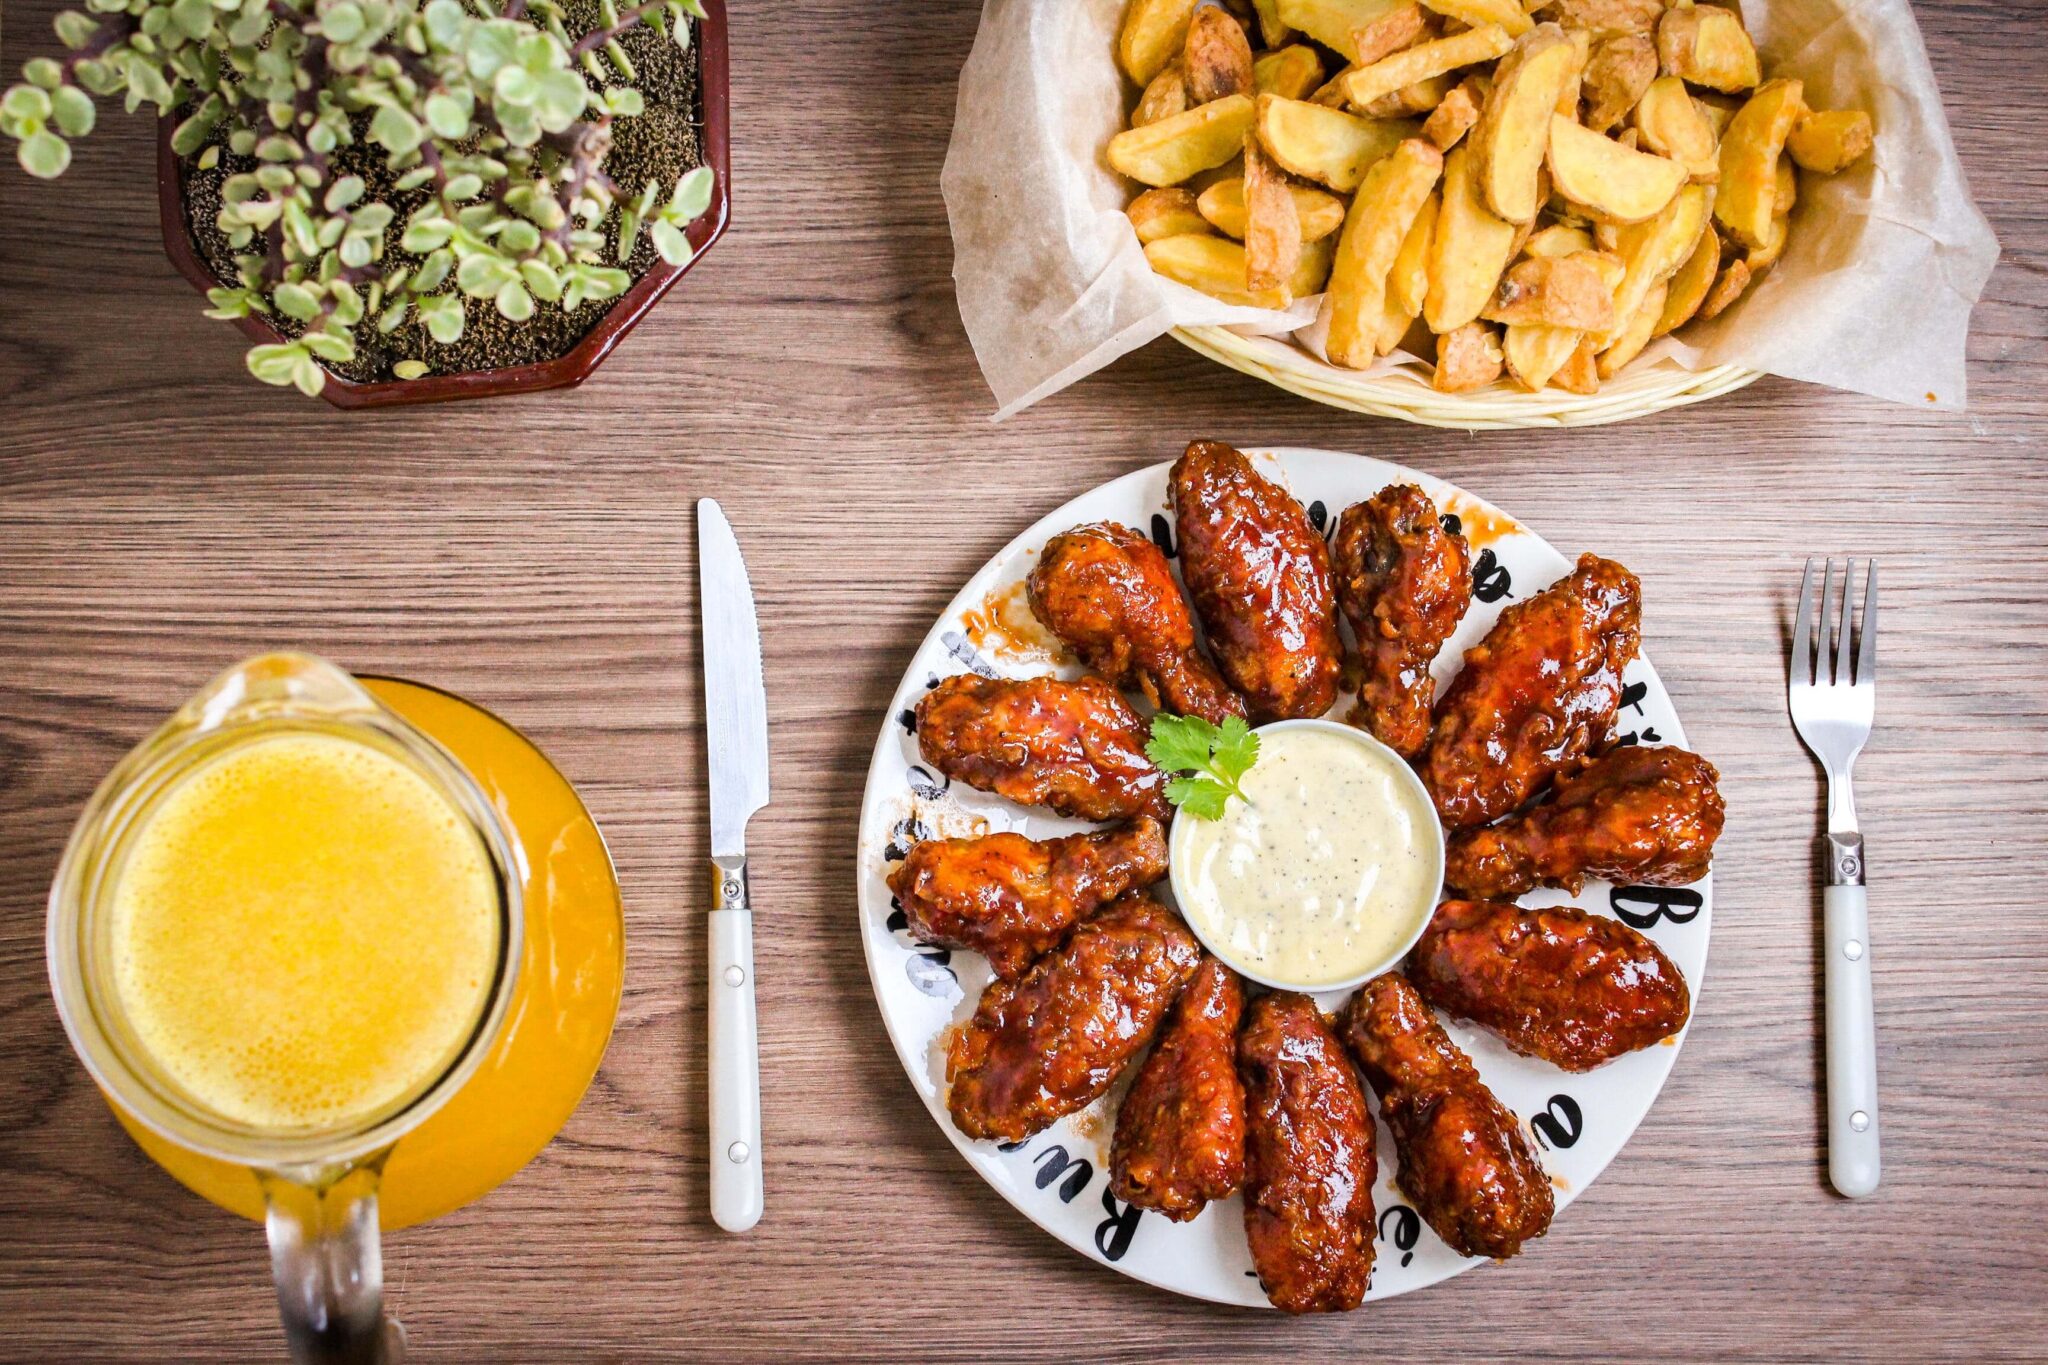 Plate of wings on wooden tabletop along with side dishes.